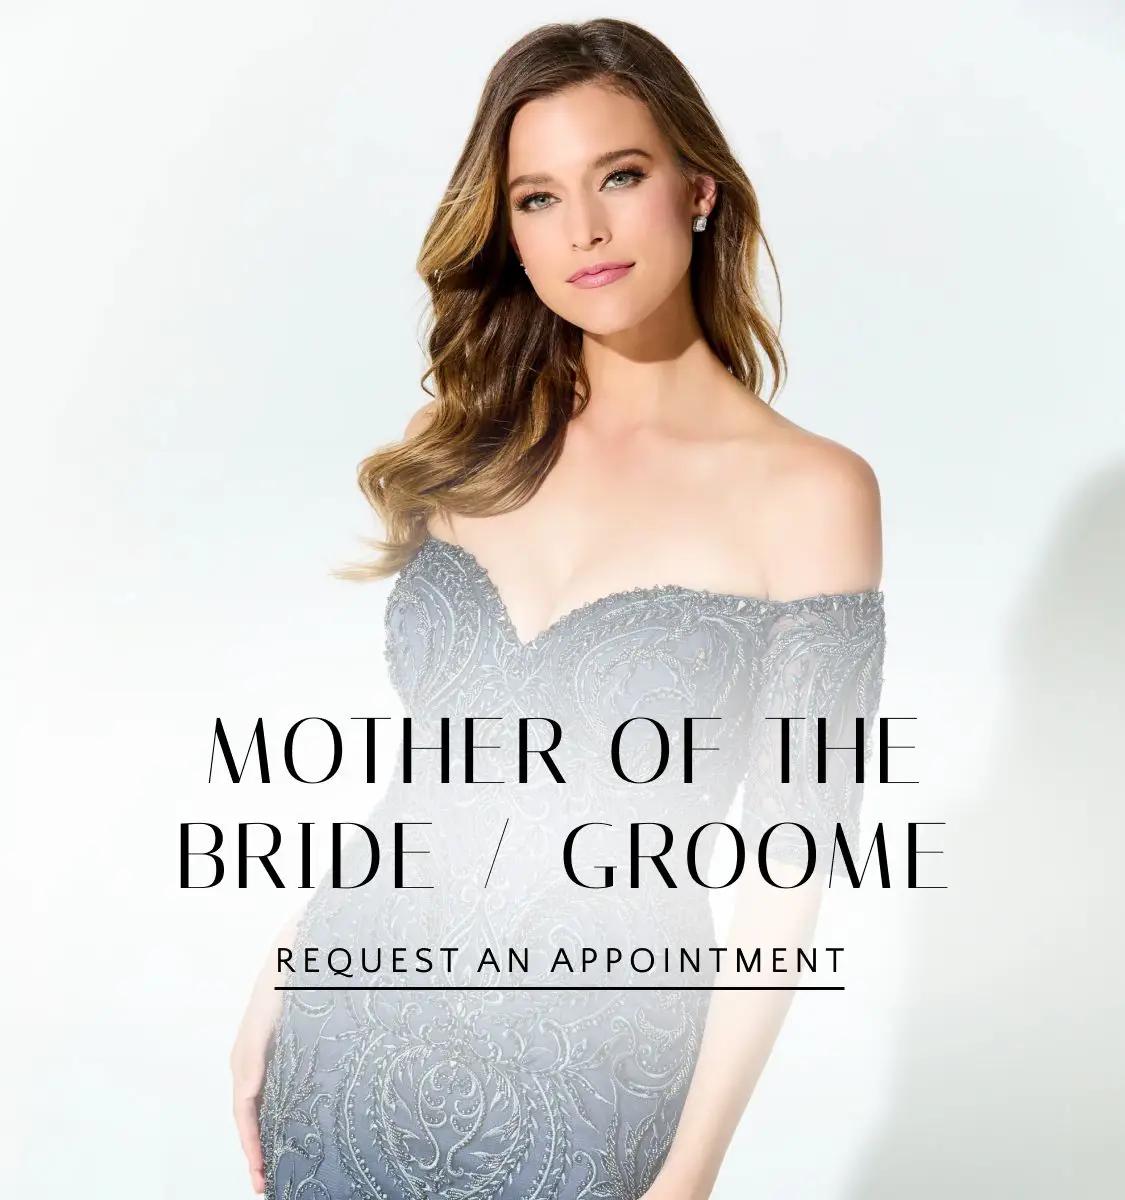 mother of the bride/groom banner for mobile